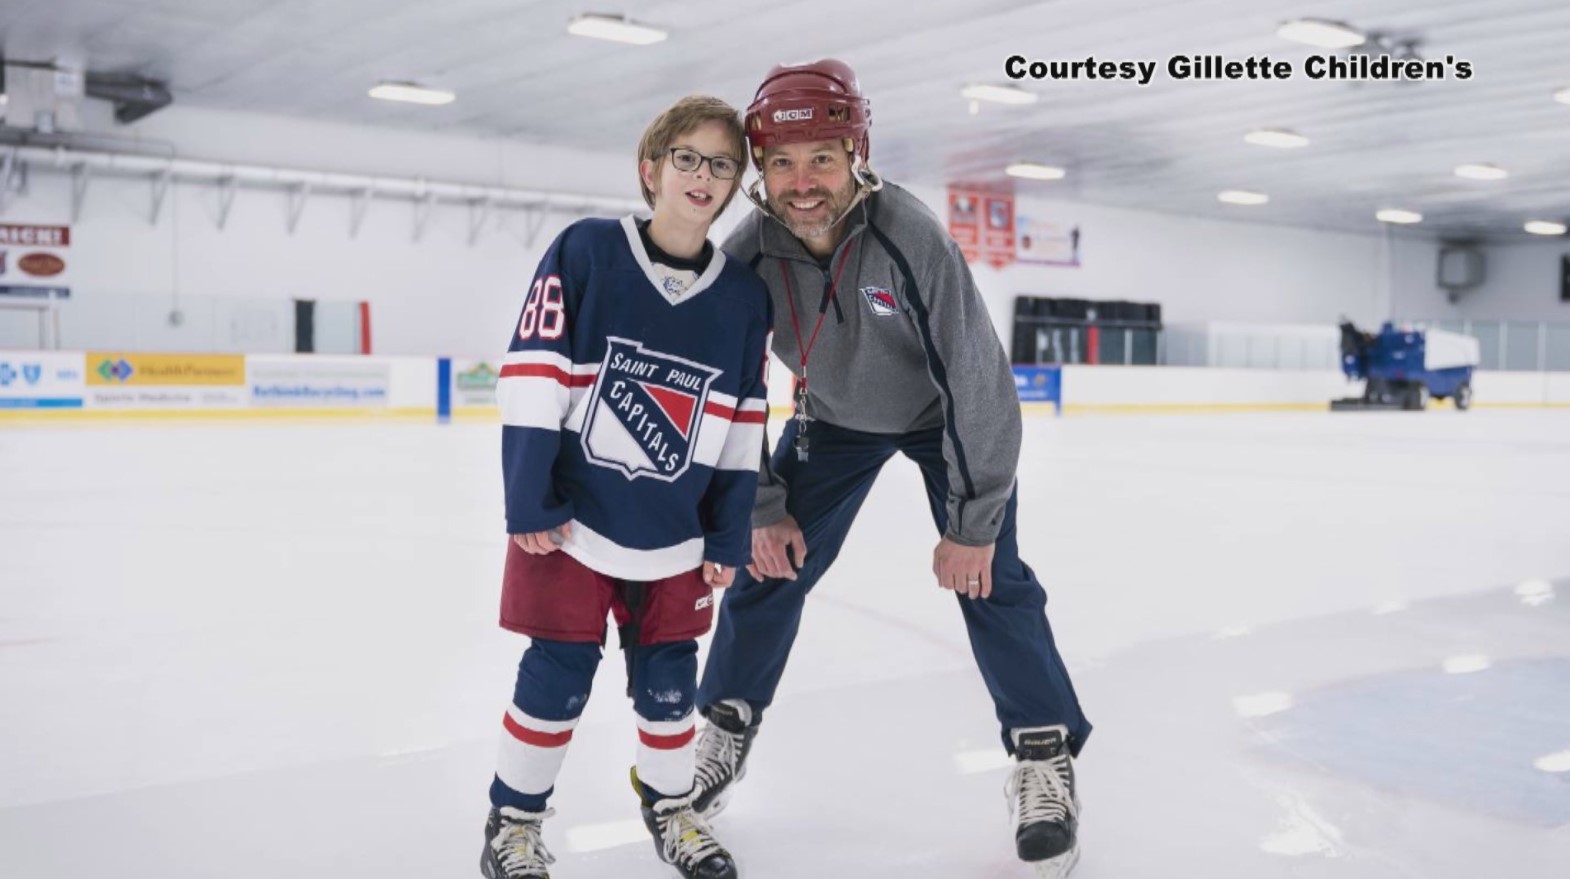 13-year-old owen nei wearing his saint paul capitals uniform as he smiles and poses with his dad and coach, chris nei, as they stand on the ice